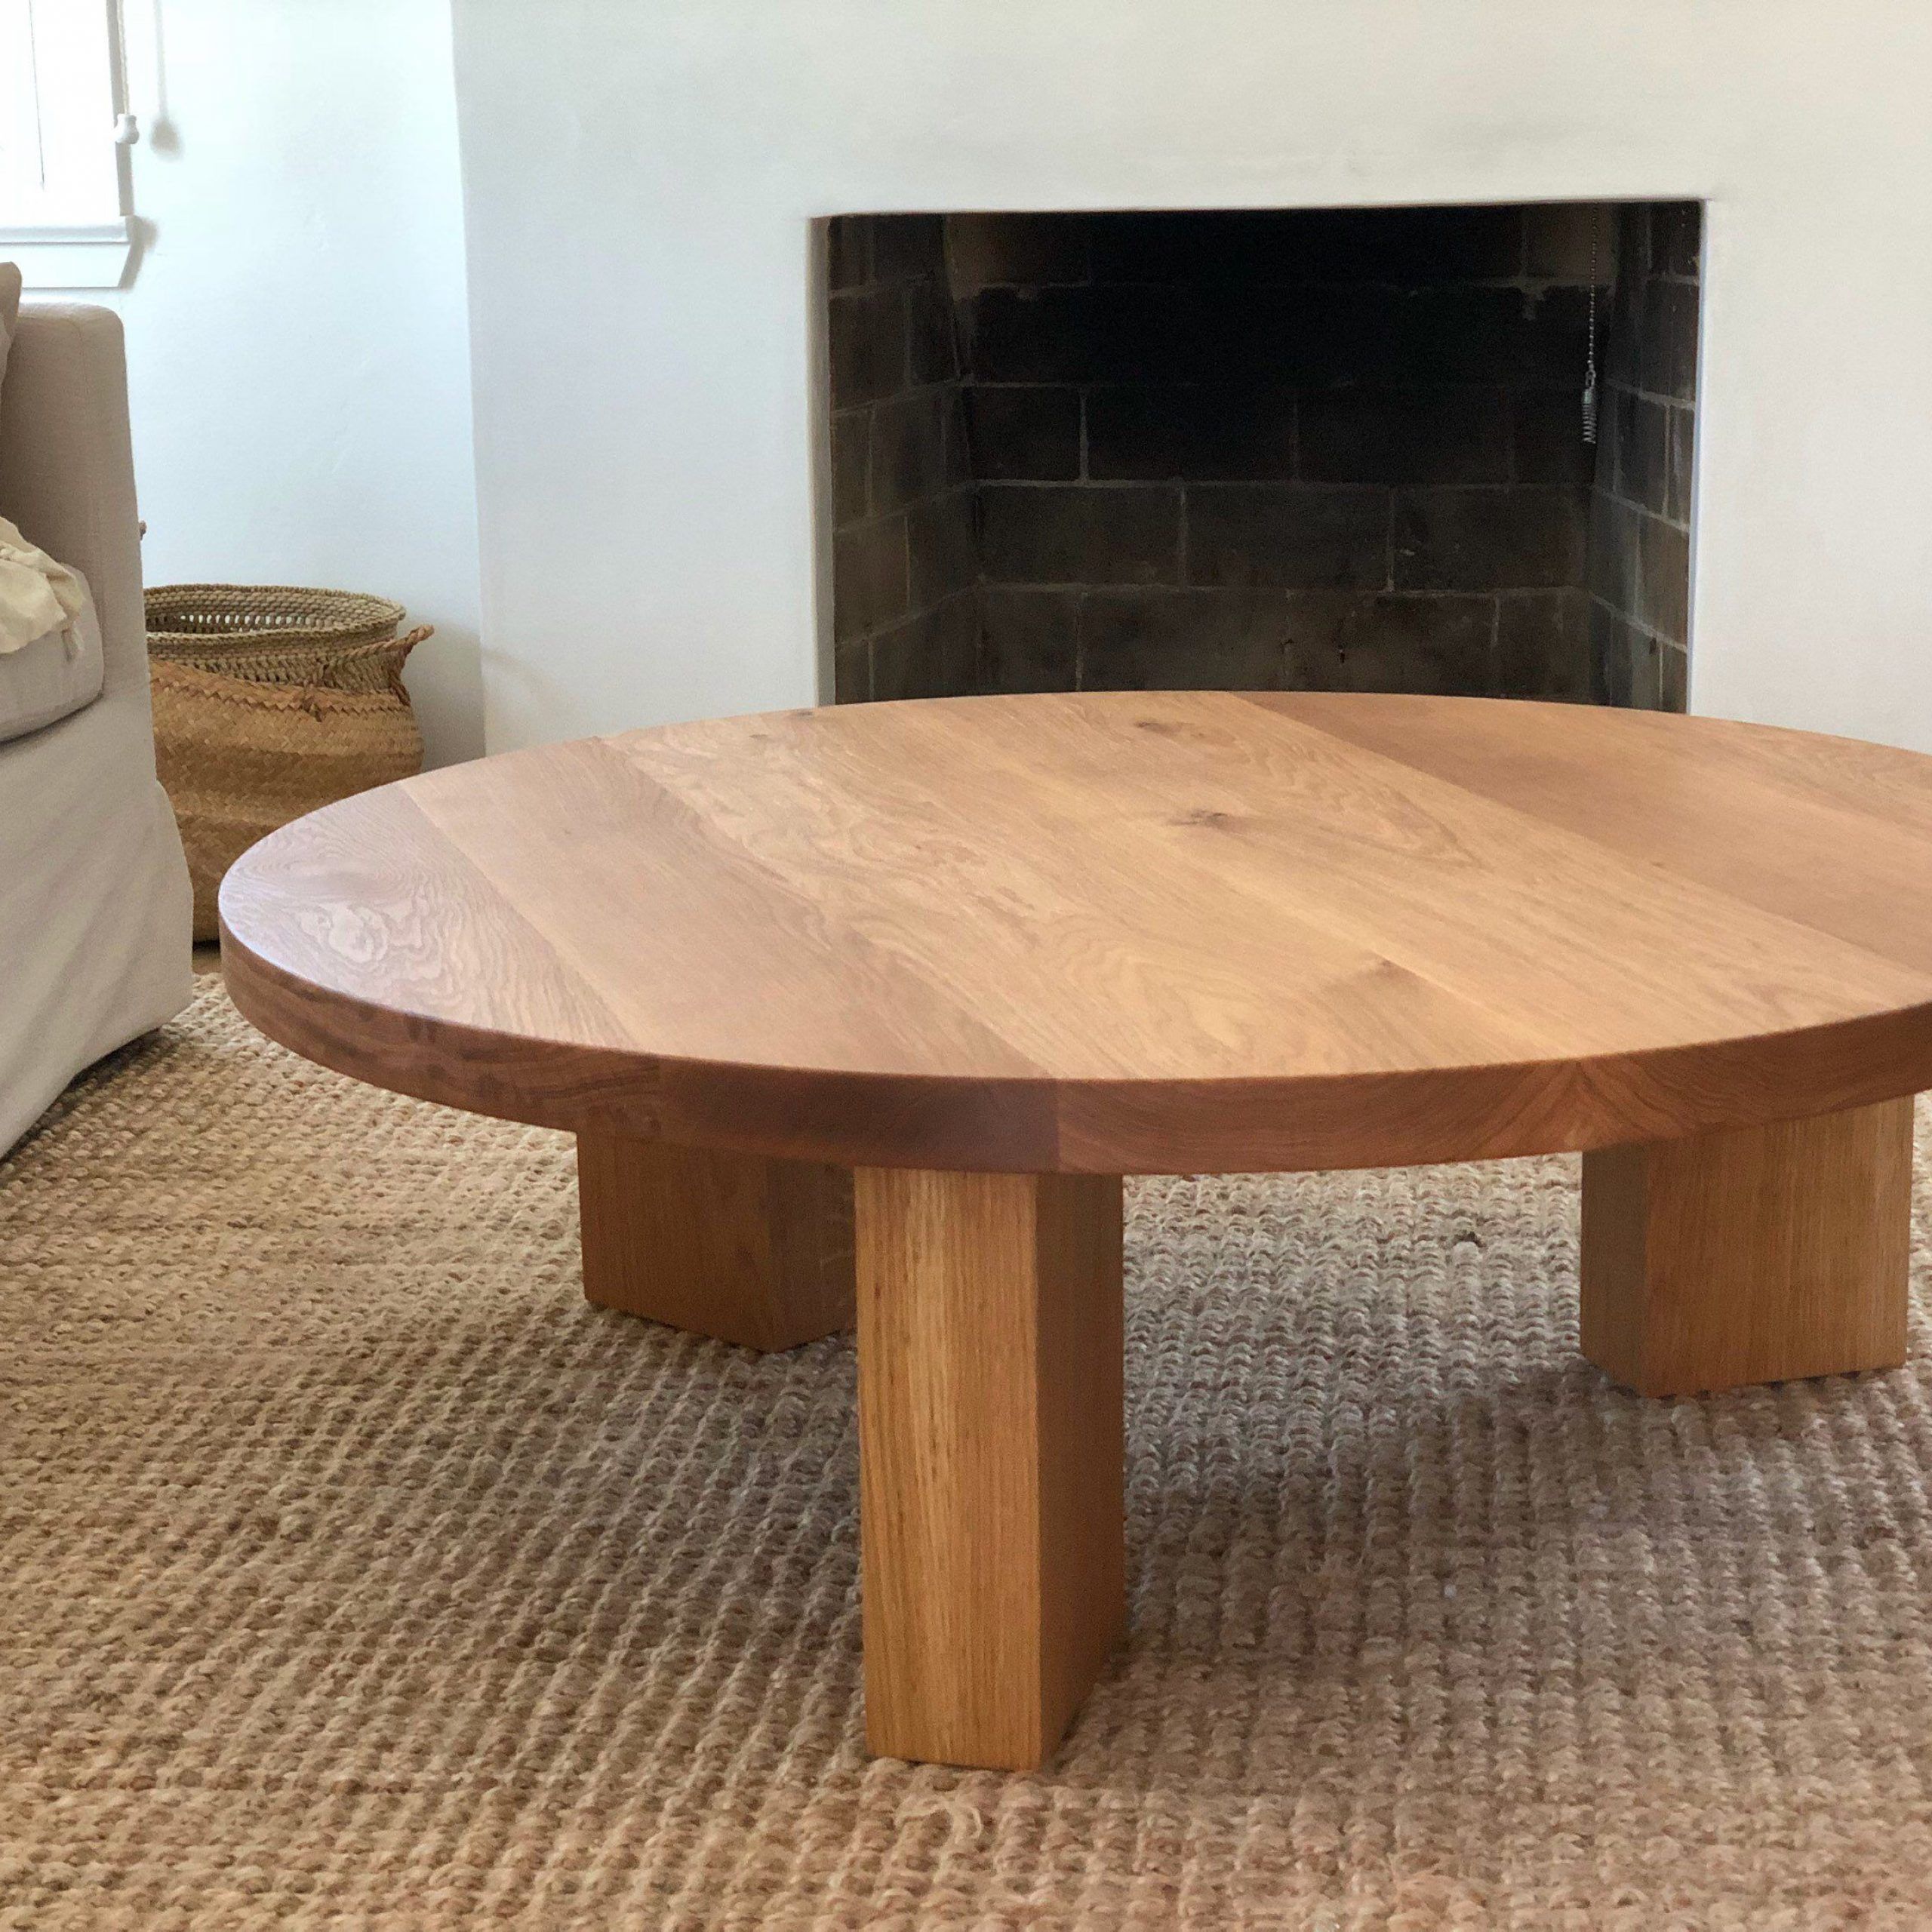 The Og 40 White Oak Modern Round 3 Leg Coffee Table | Etsy Inside Metal Legs And Oak Top Round Coffee Tables (View 8 of 15)